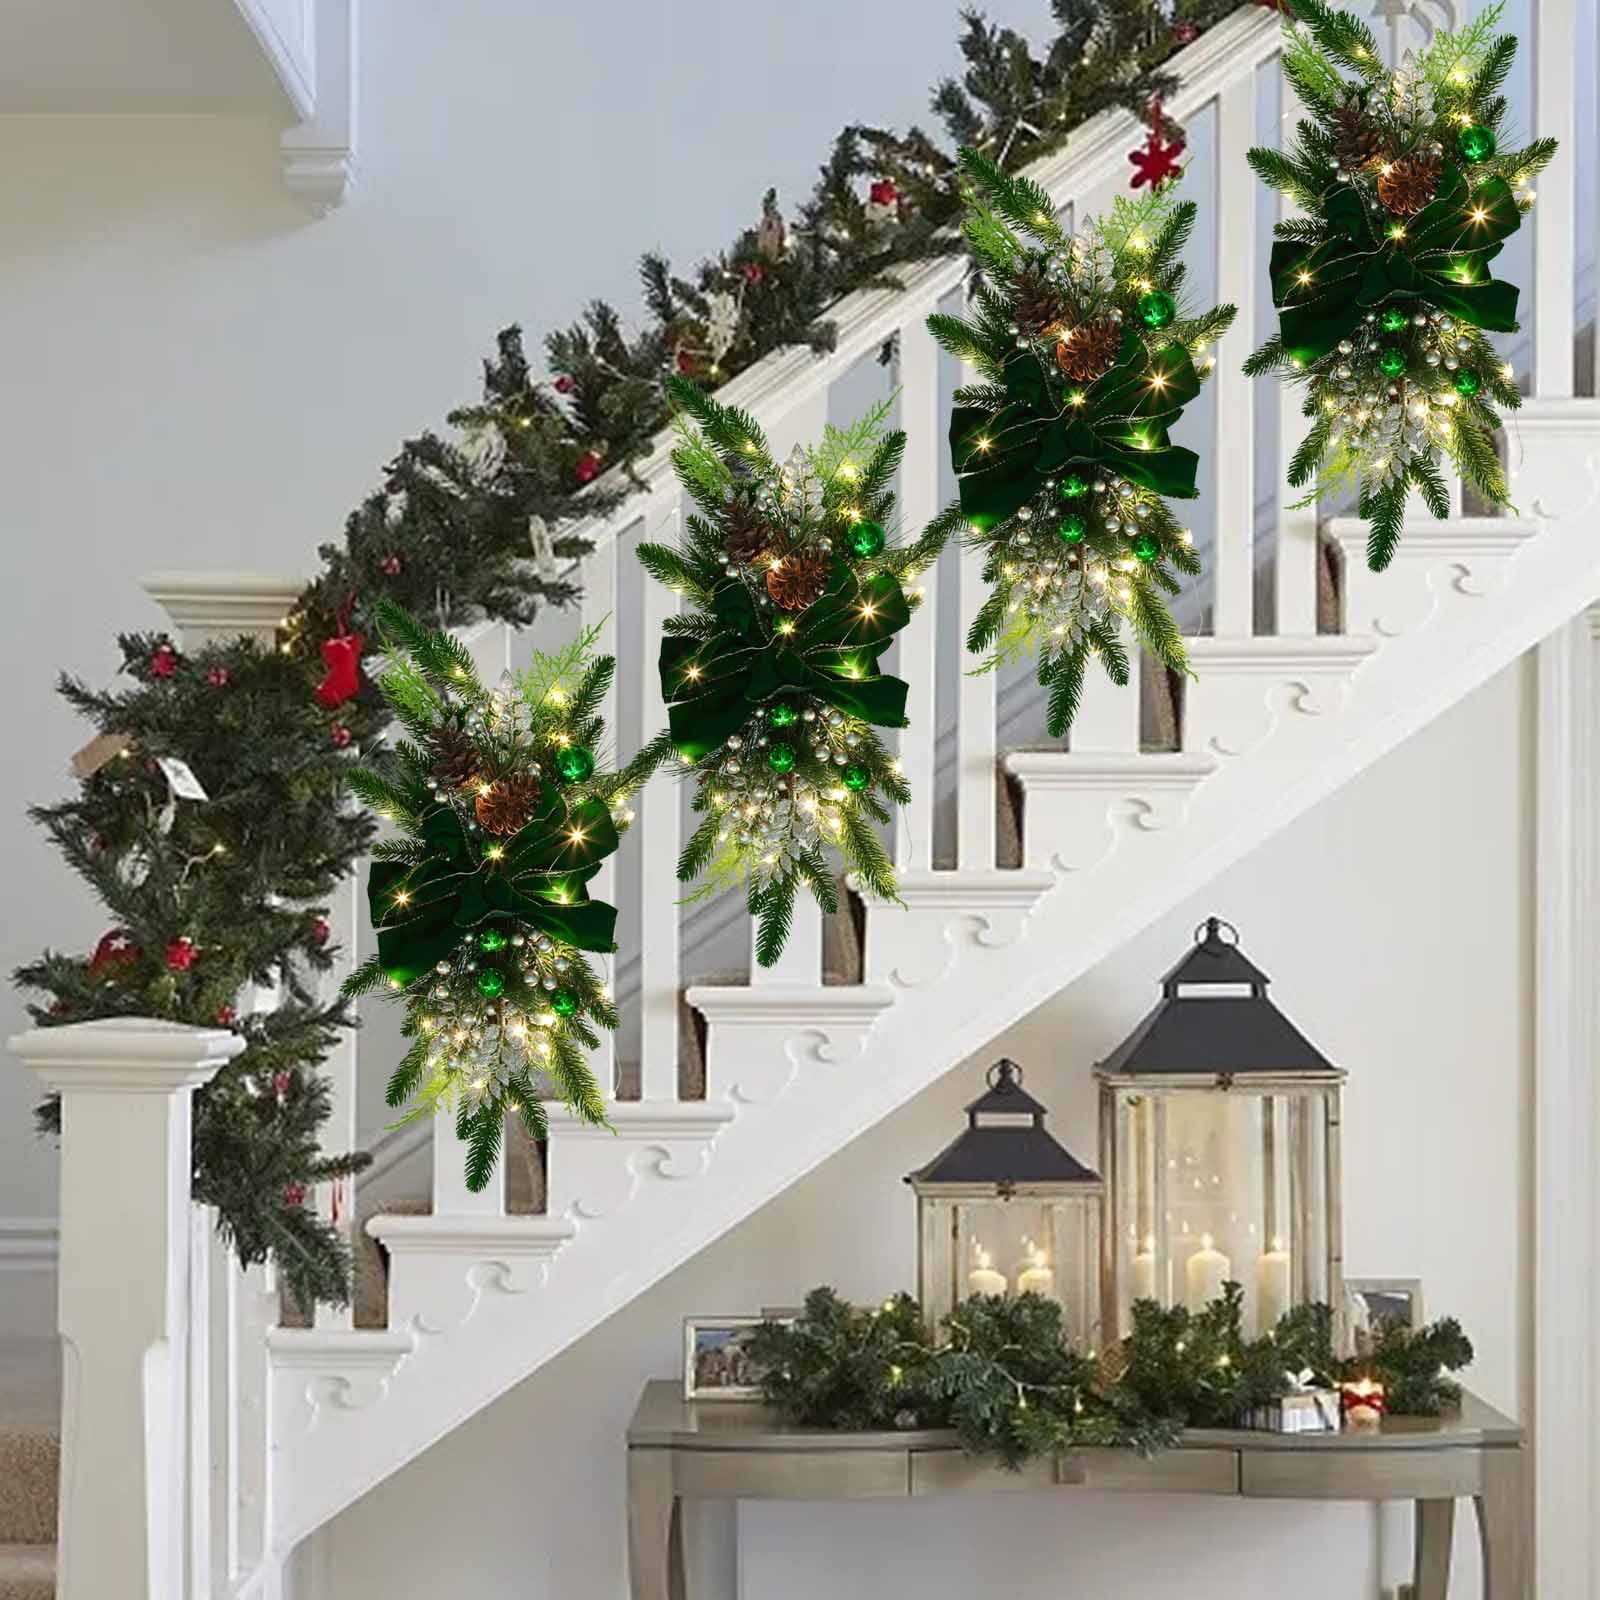 How to Hang Garland on Stairs + Entryway Christmas Decor - Bless